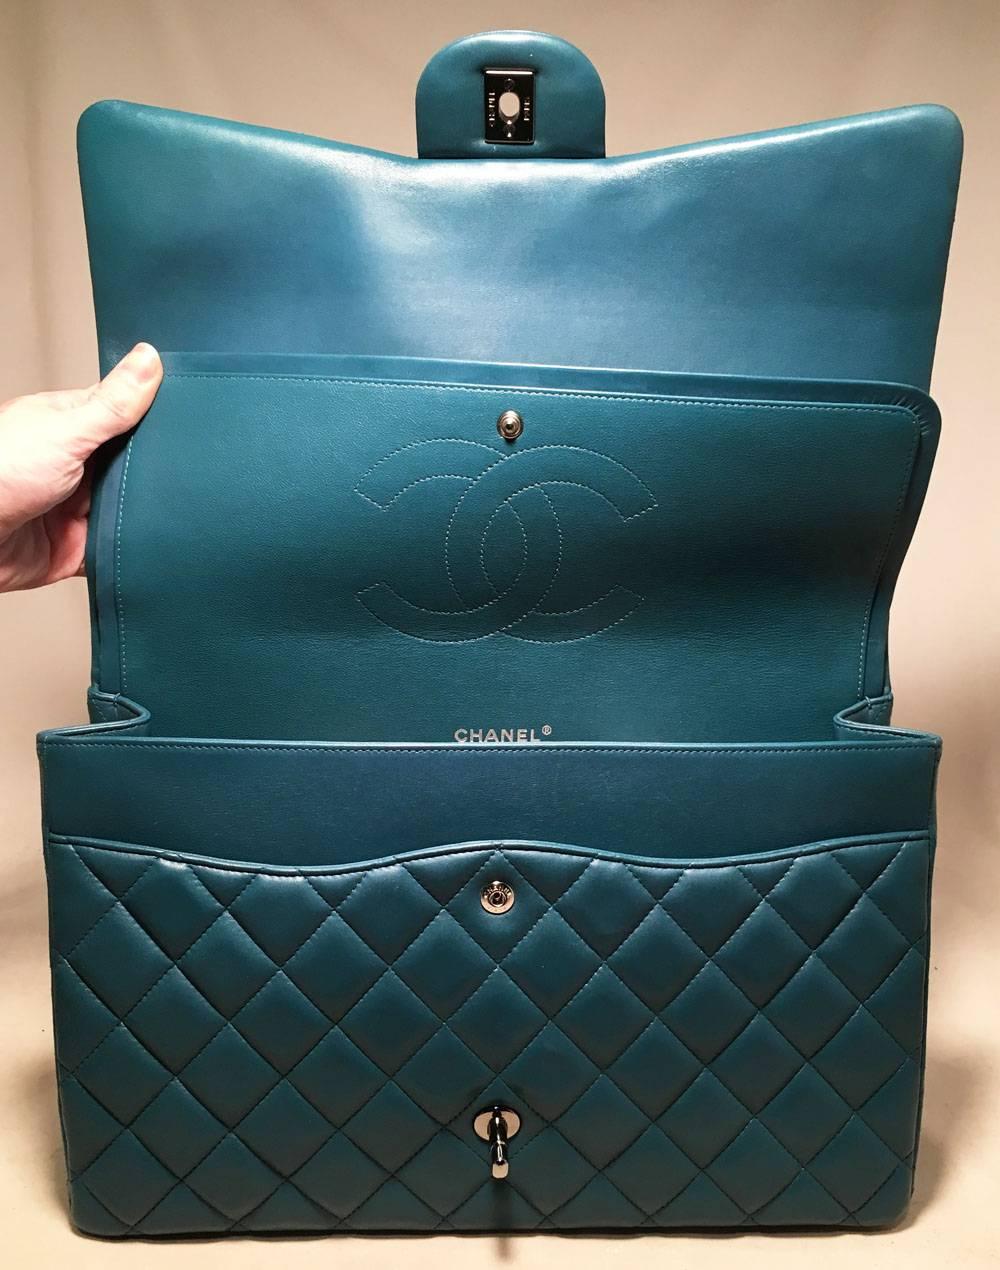 Chanel Dark Teal Quilted Leather 2.55 Maxi Double Flap Classic Shoulder Bag 1